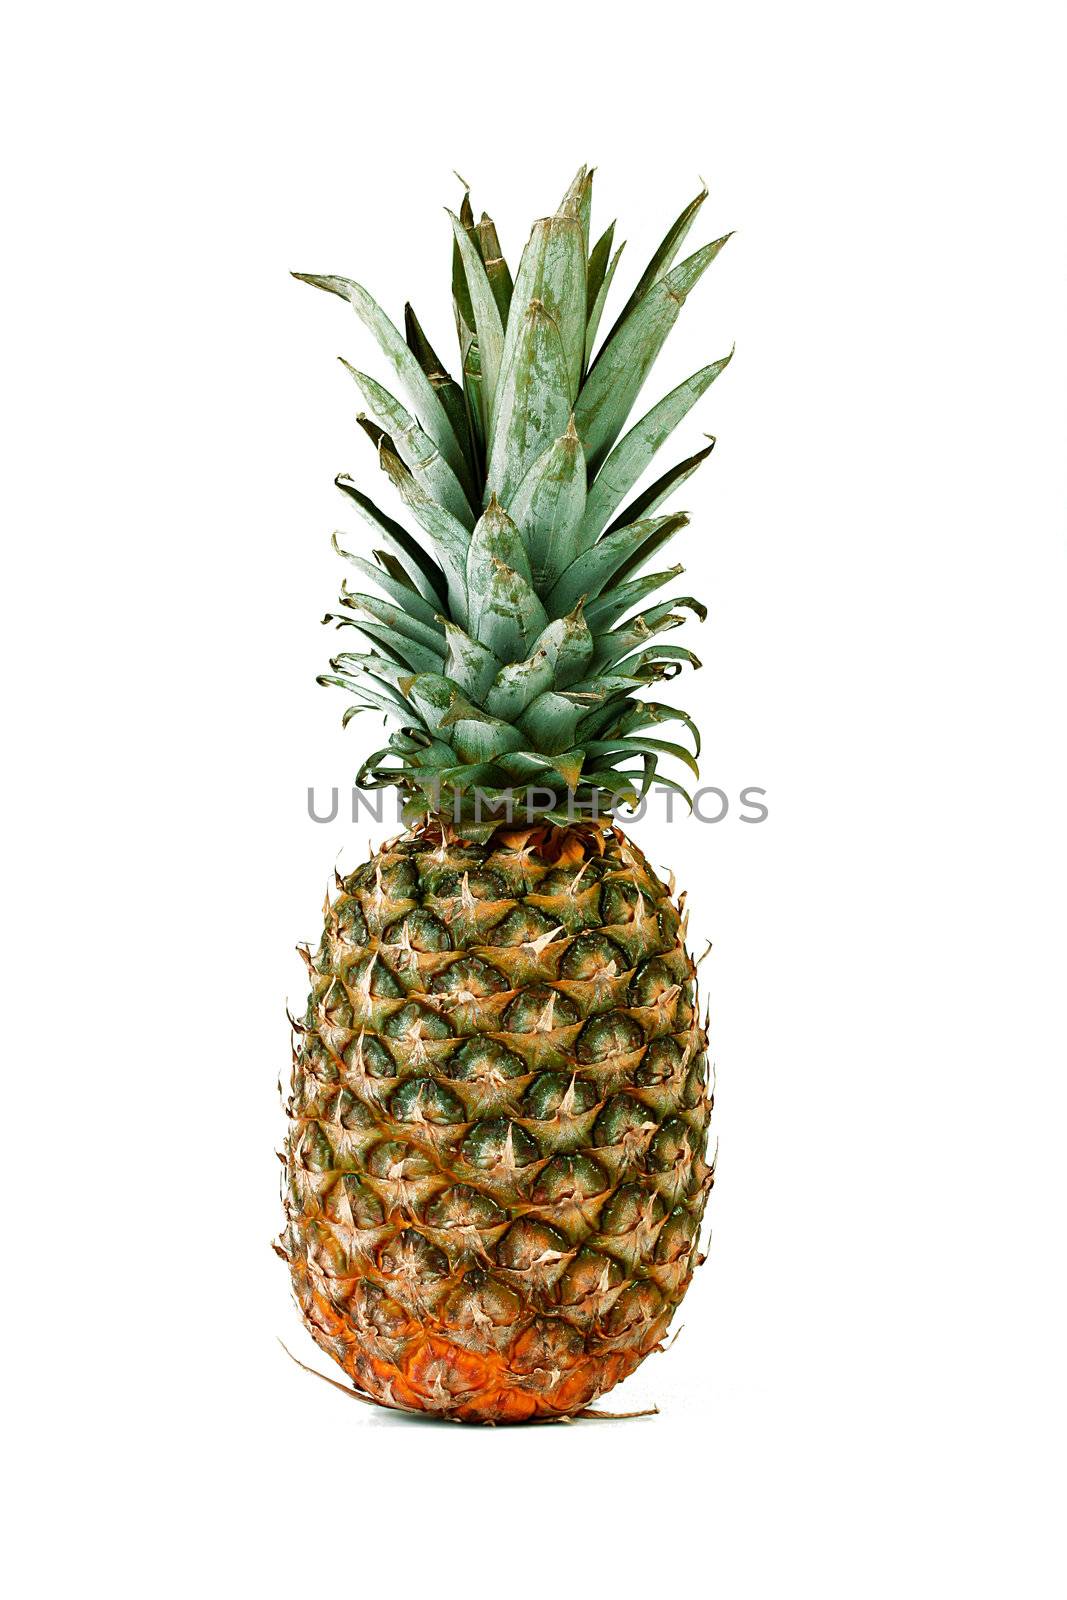 Tropical sweet fruit - pineapple on a white background. Pineapple is used in many menus.